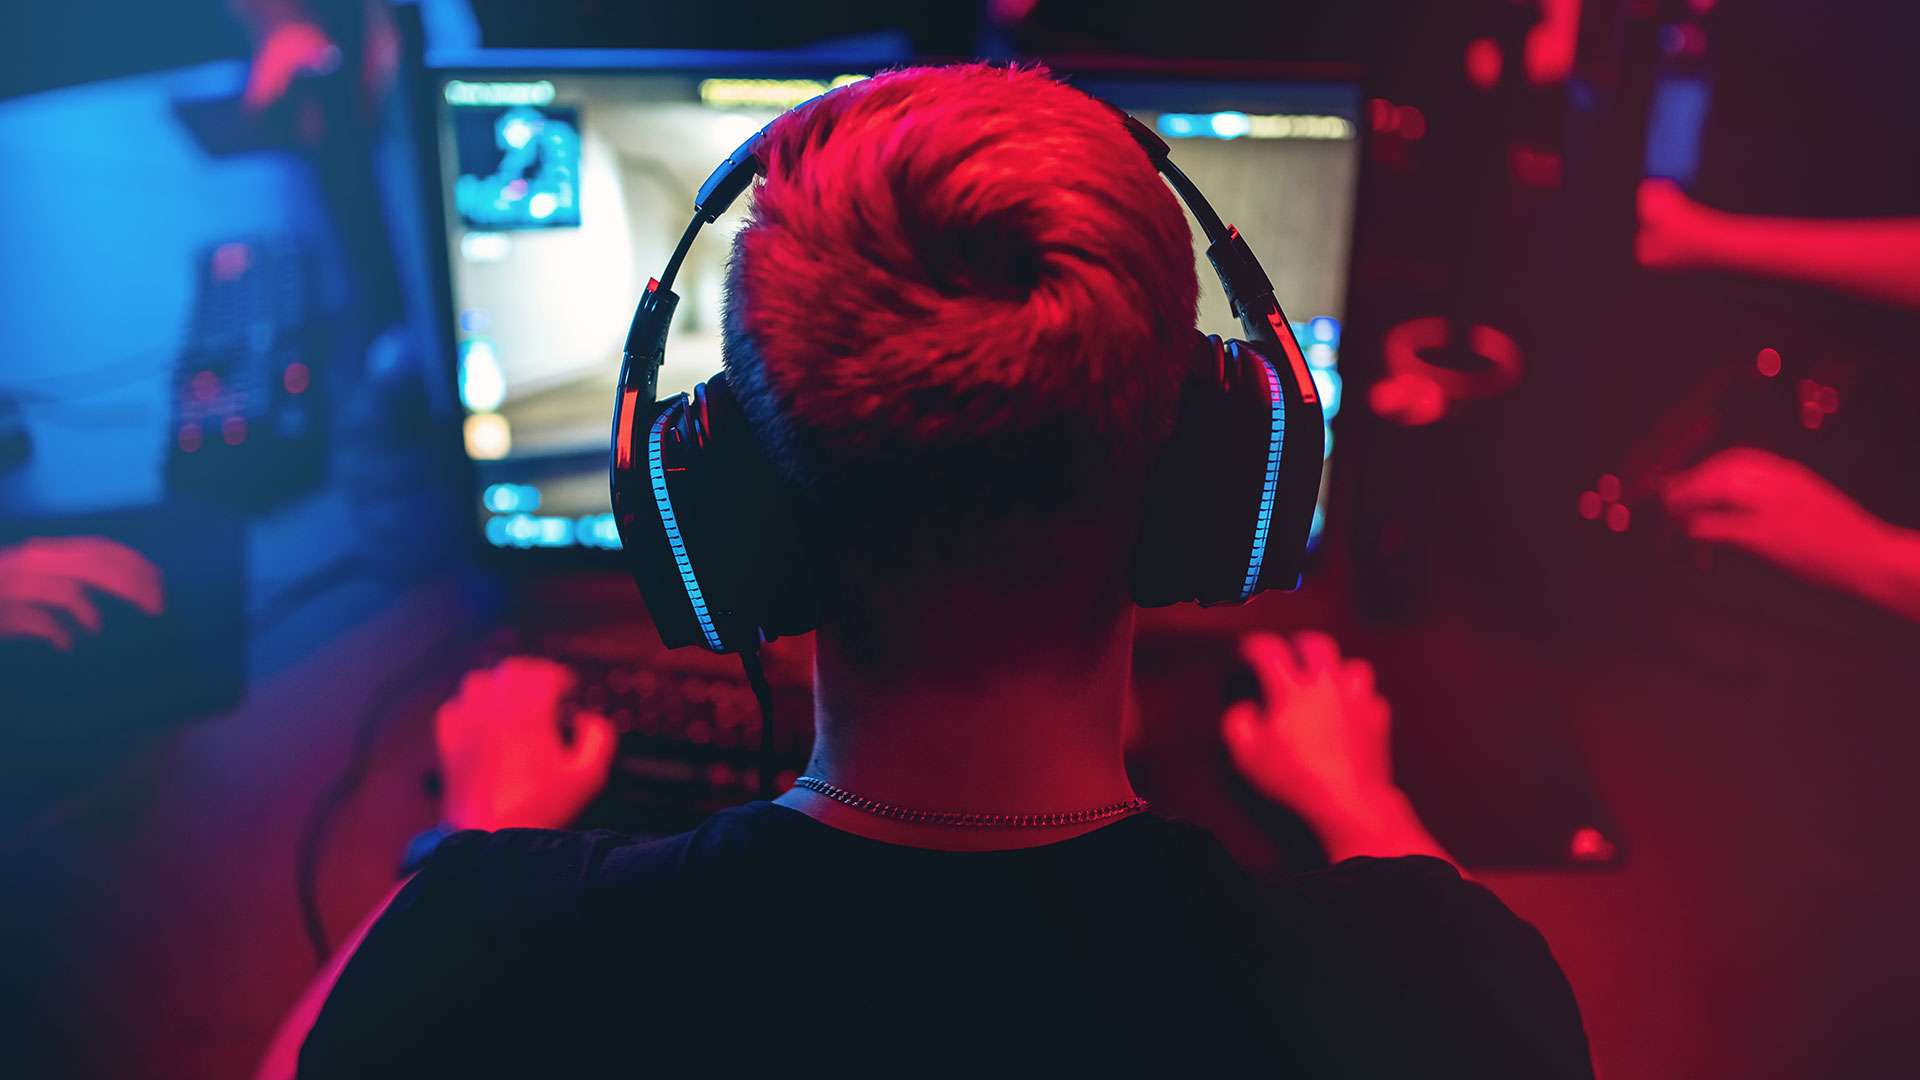 A boy playing games on the PC with headphones